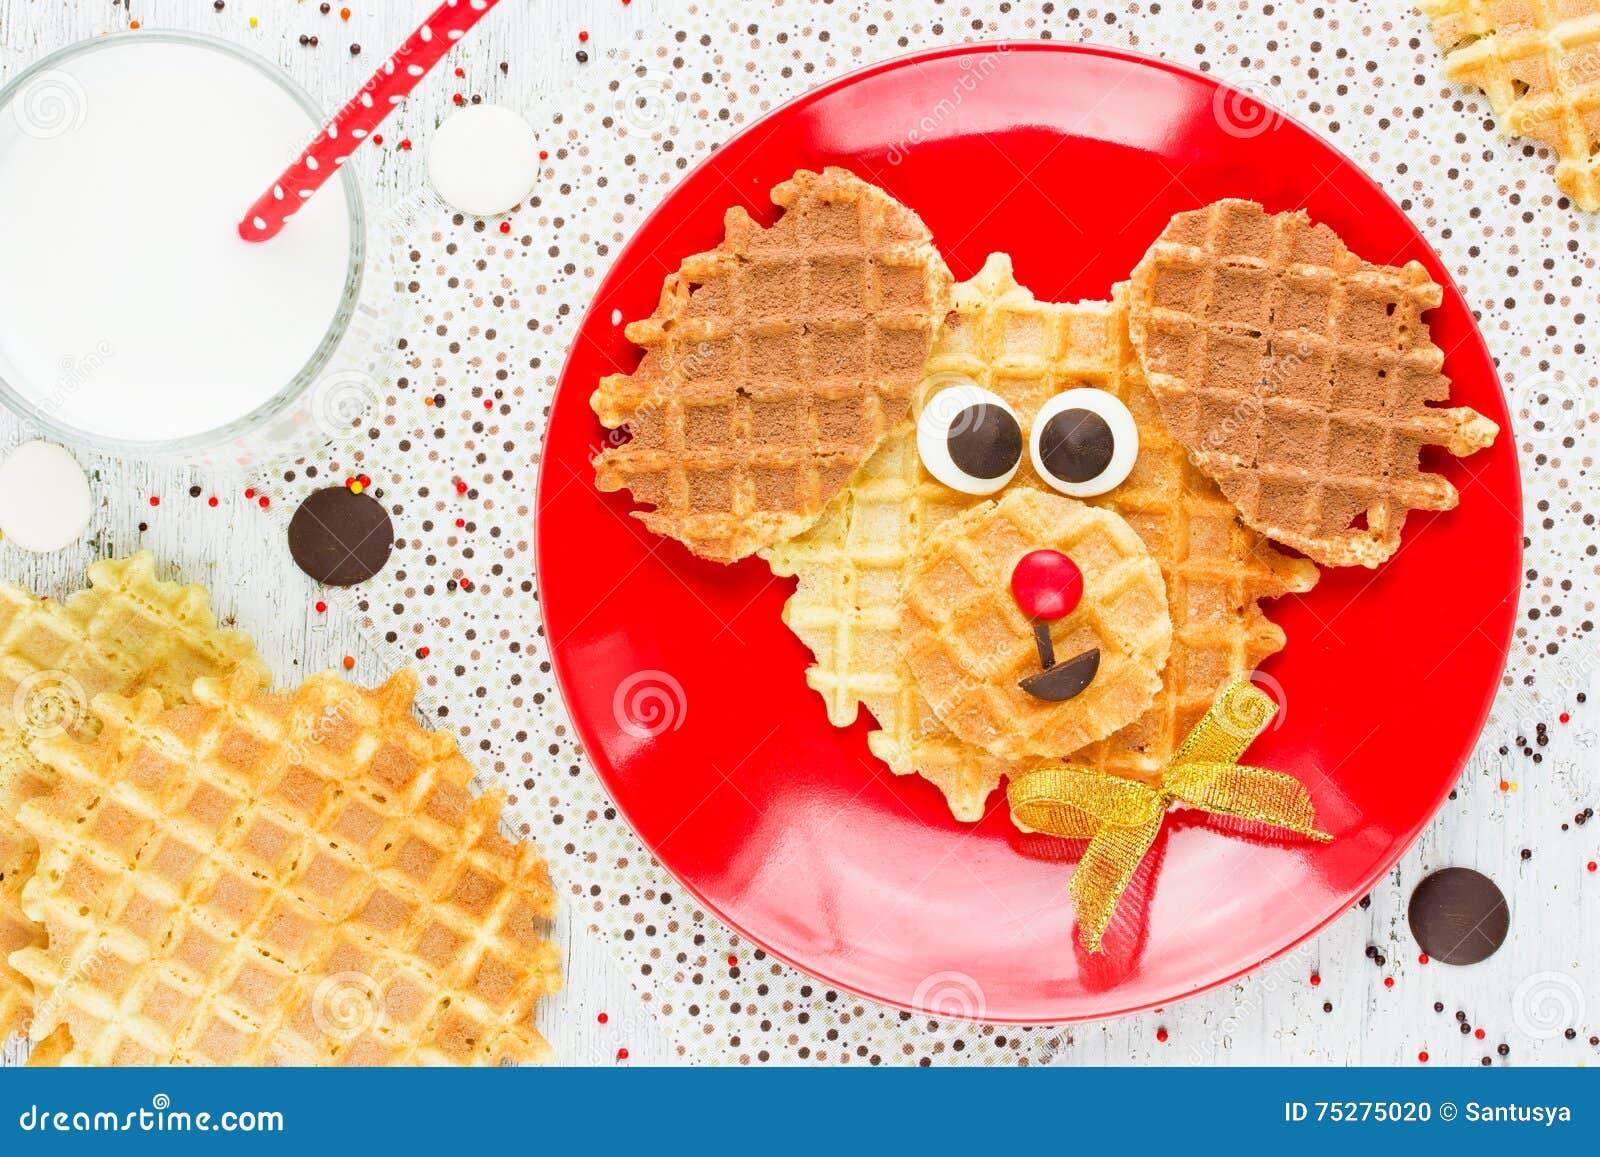 Sweet Waffles with Chocolate and Milk for Baby Breakfast. Creative